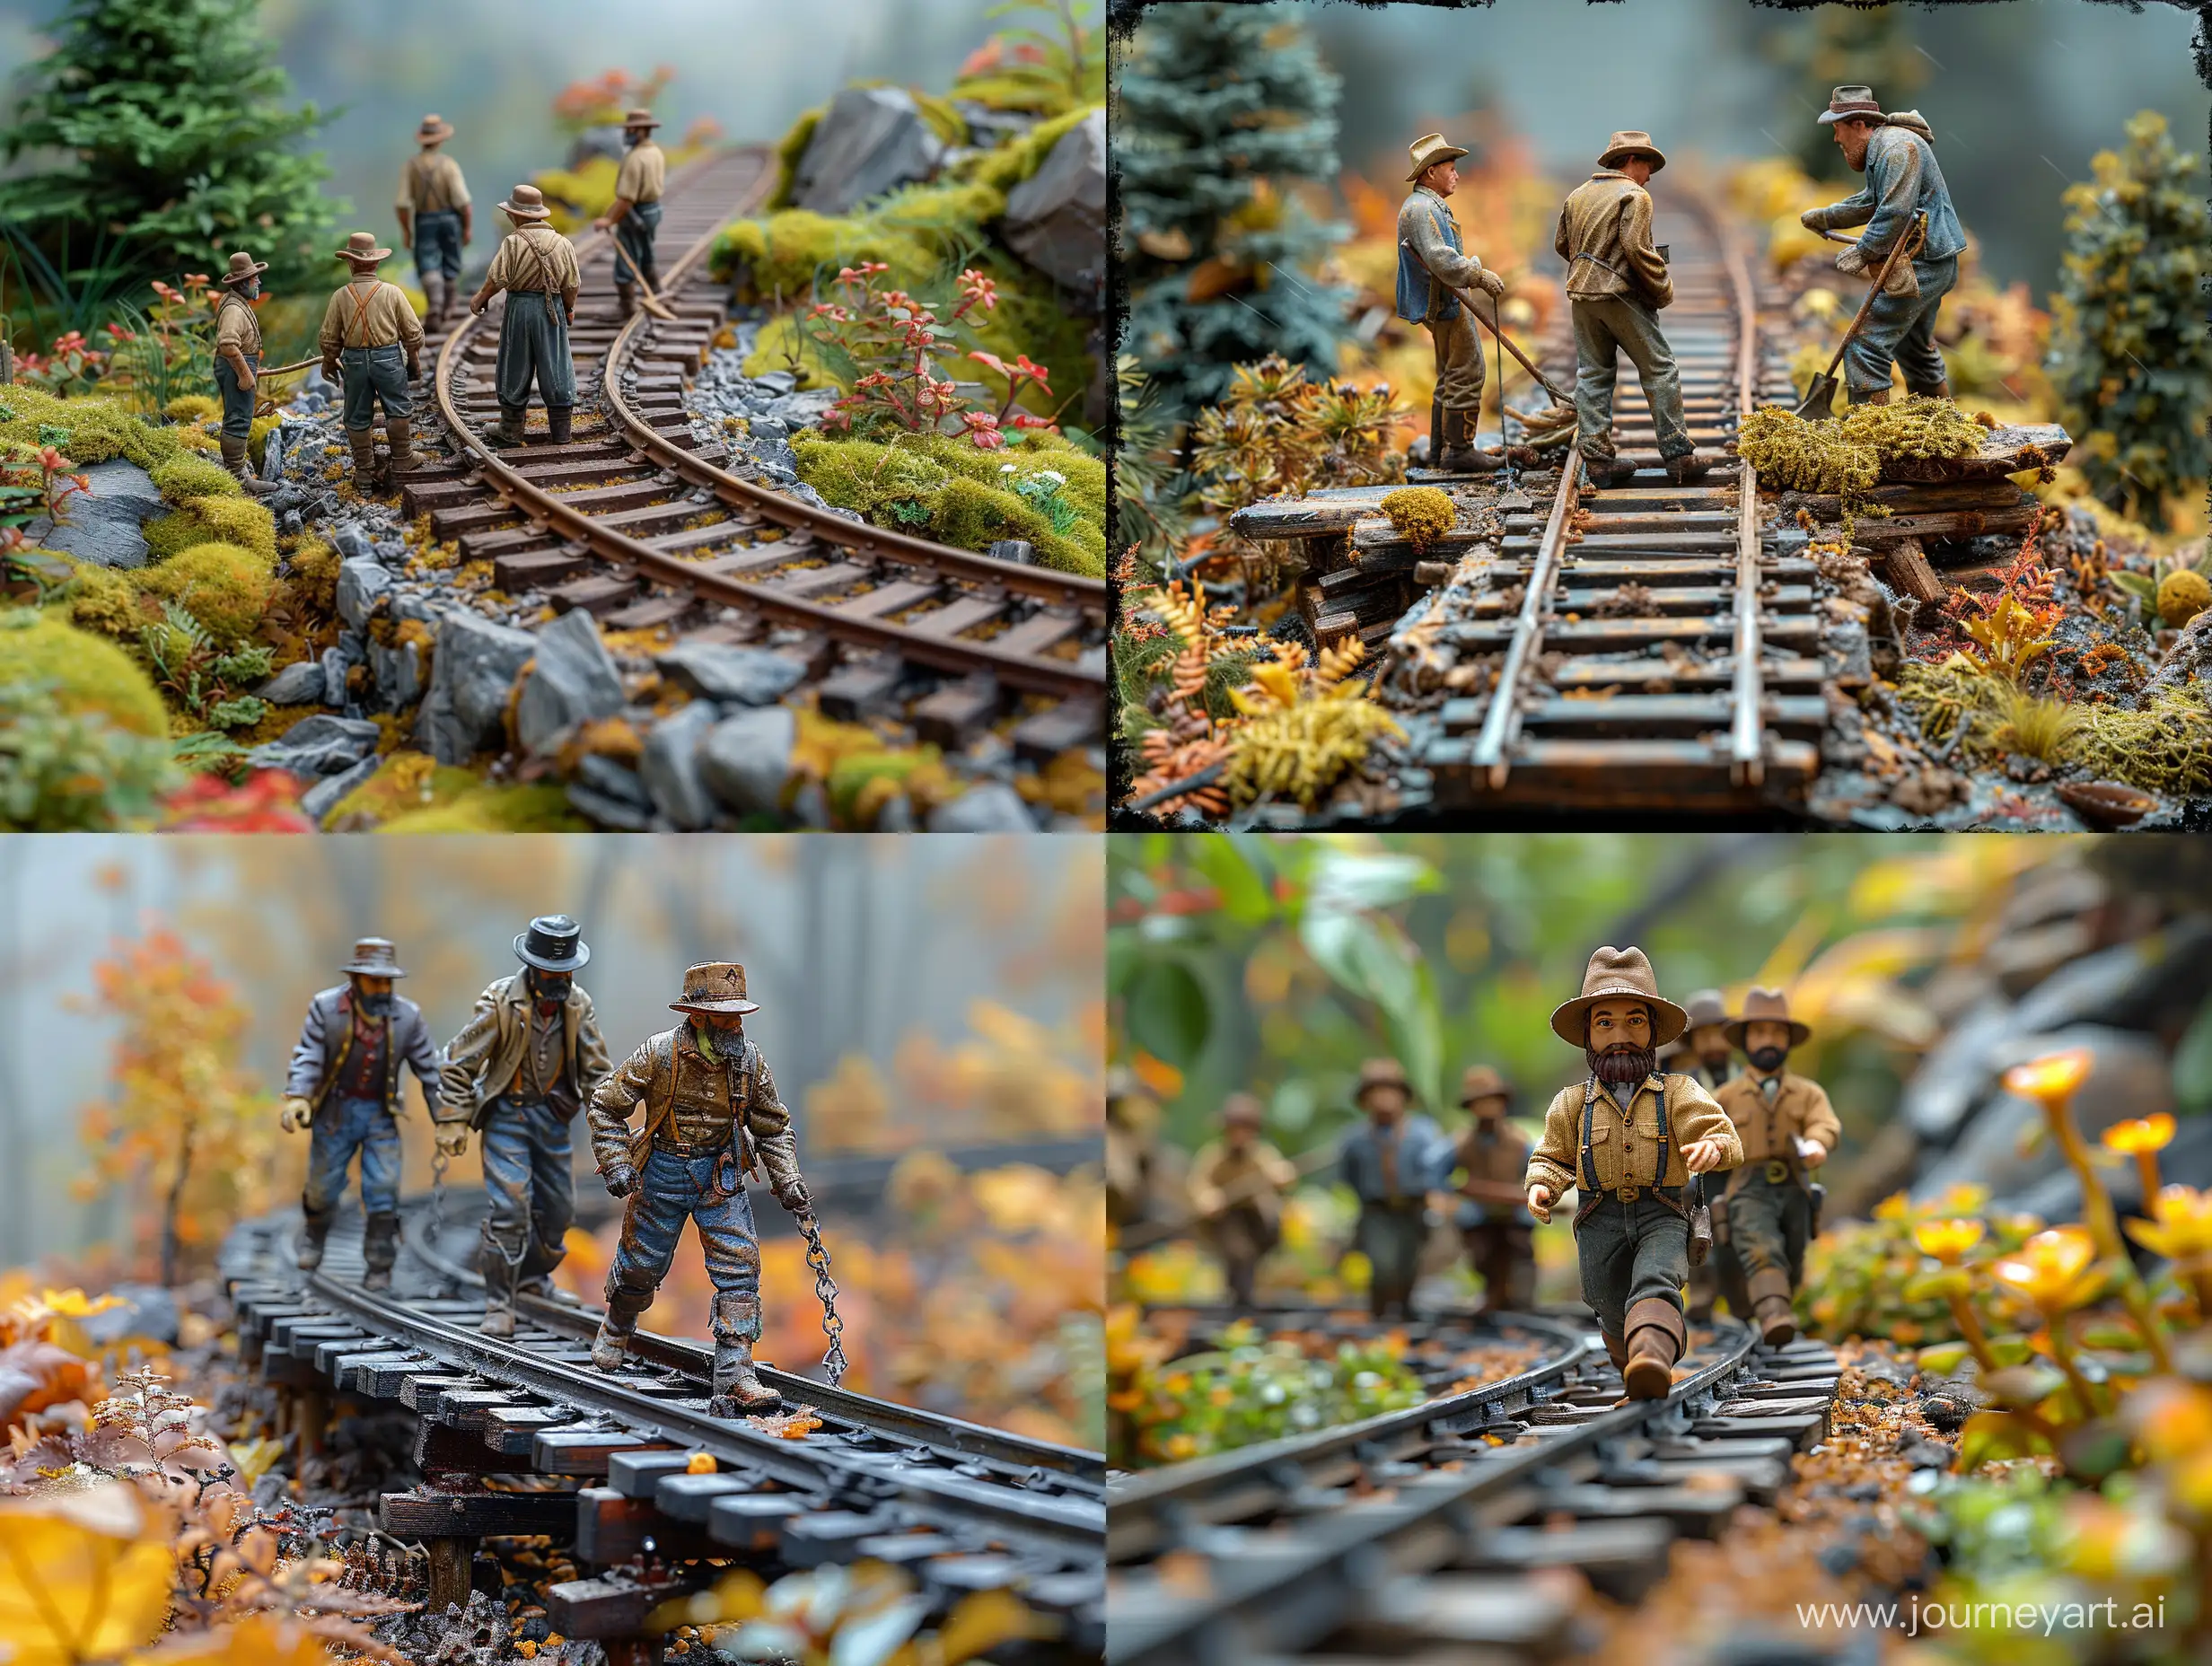 close up Railway workers in 1850 doing their daily work on the railway in normal and natural landscape American frontier conditions, with realistic and precise details in a beautiful and harmonious image with professional effects, background blur, precise details and creativity. highly detailed --style raw --stylize 750.